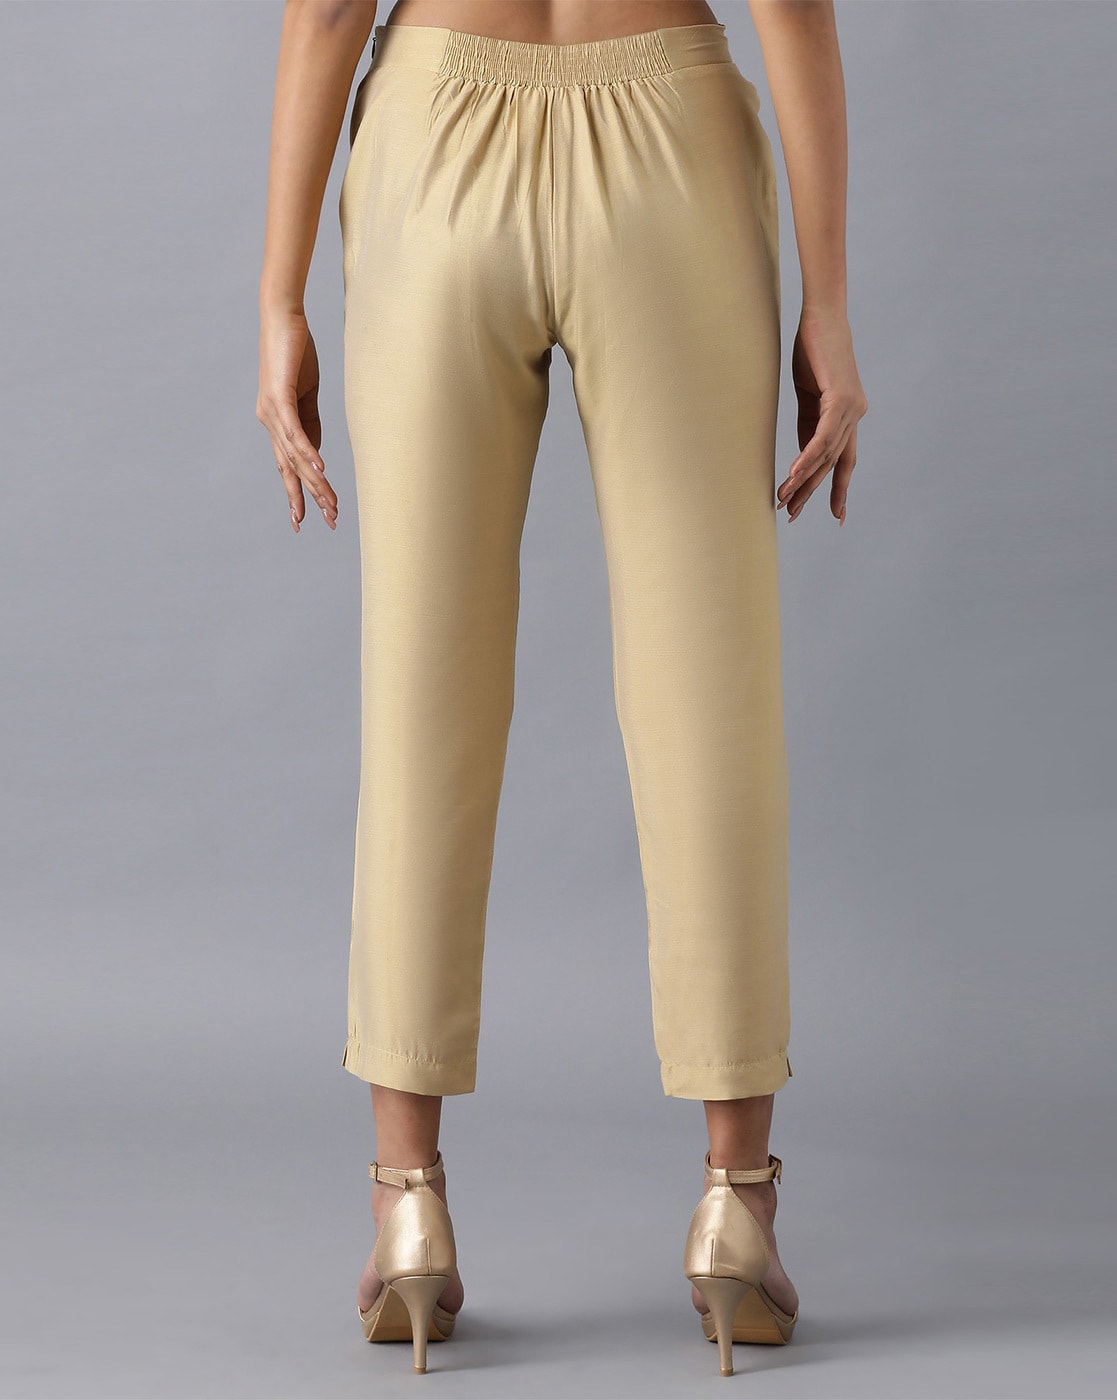 Dripping in Gold Pants – Cynthia Rowley